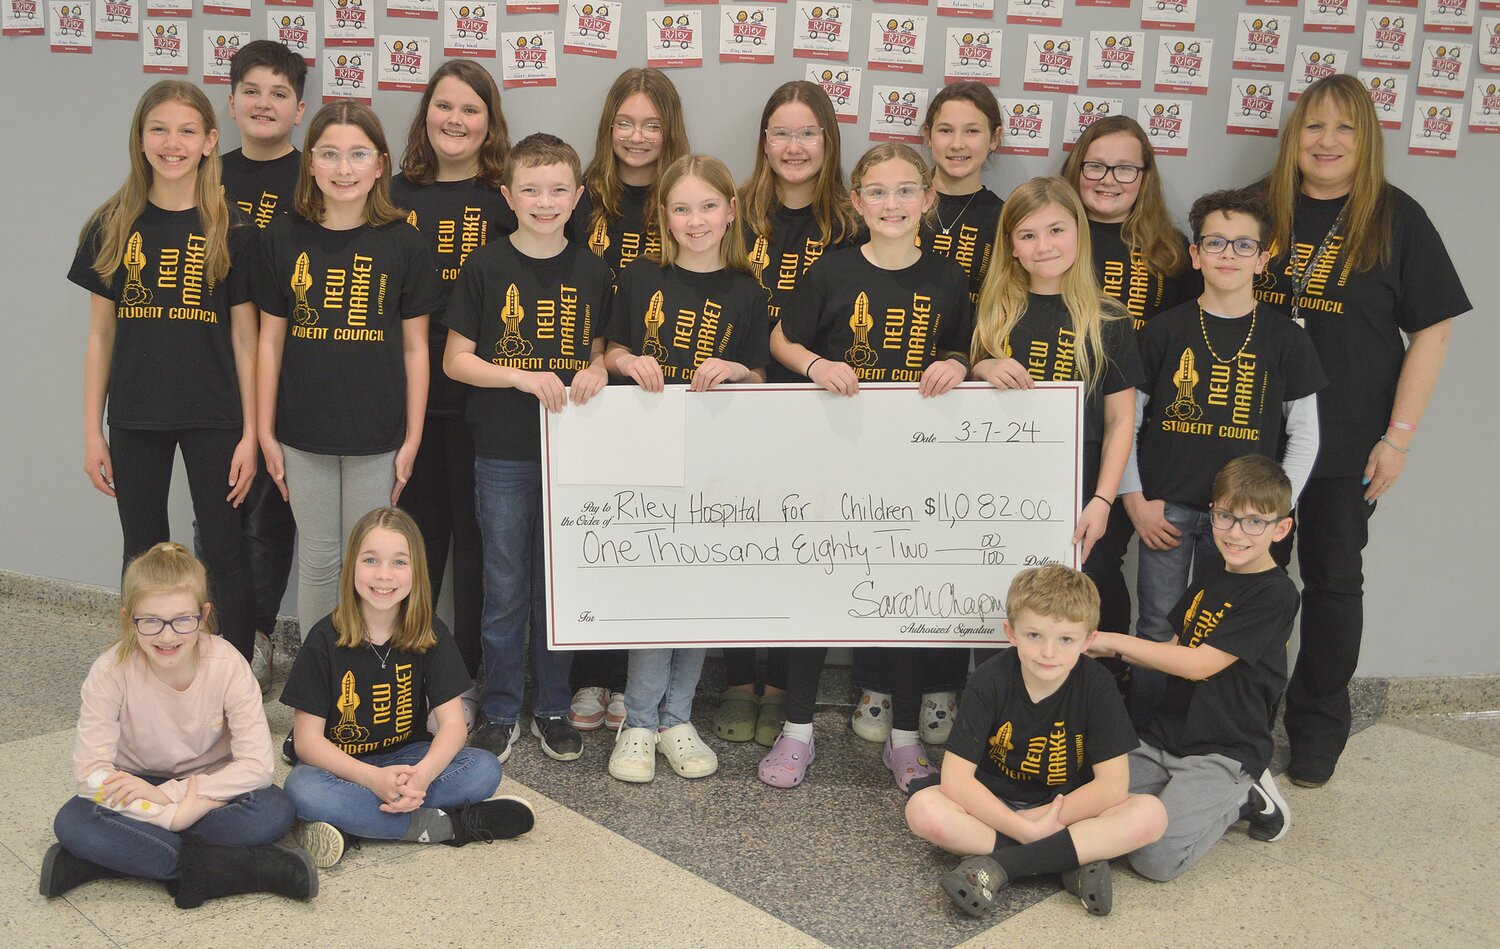 New Market Elementary Student Council donated $1,082 to Riley Children’s Hospital. Students sold icons, pencils and bracelets during the month of February. Glenna Livesay, student council advisor for 23 years, said the student council has donated $25,311 in that time period. The council is caring about their community and is continually on the lookout for local students or families in need of assistance. The council also conducts a spirit day every month to benefit the Veterans Memorial Park, they volunteer monthly at the Animal Welfare League of Montgomery County, conduct an annual talent show and put on an Easter egg hunt for first graders in the school. This year the council is comprised of 19 students.